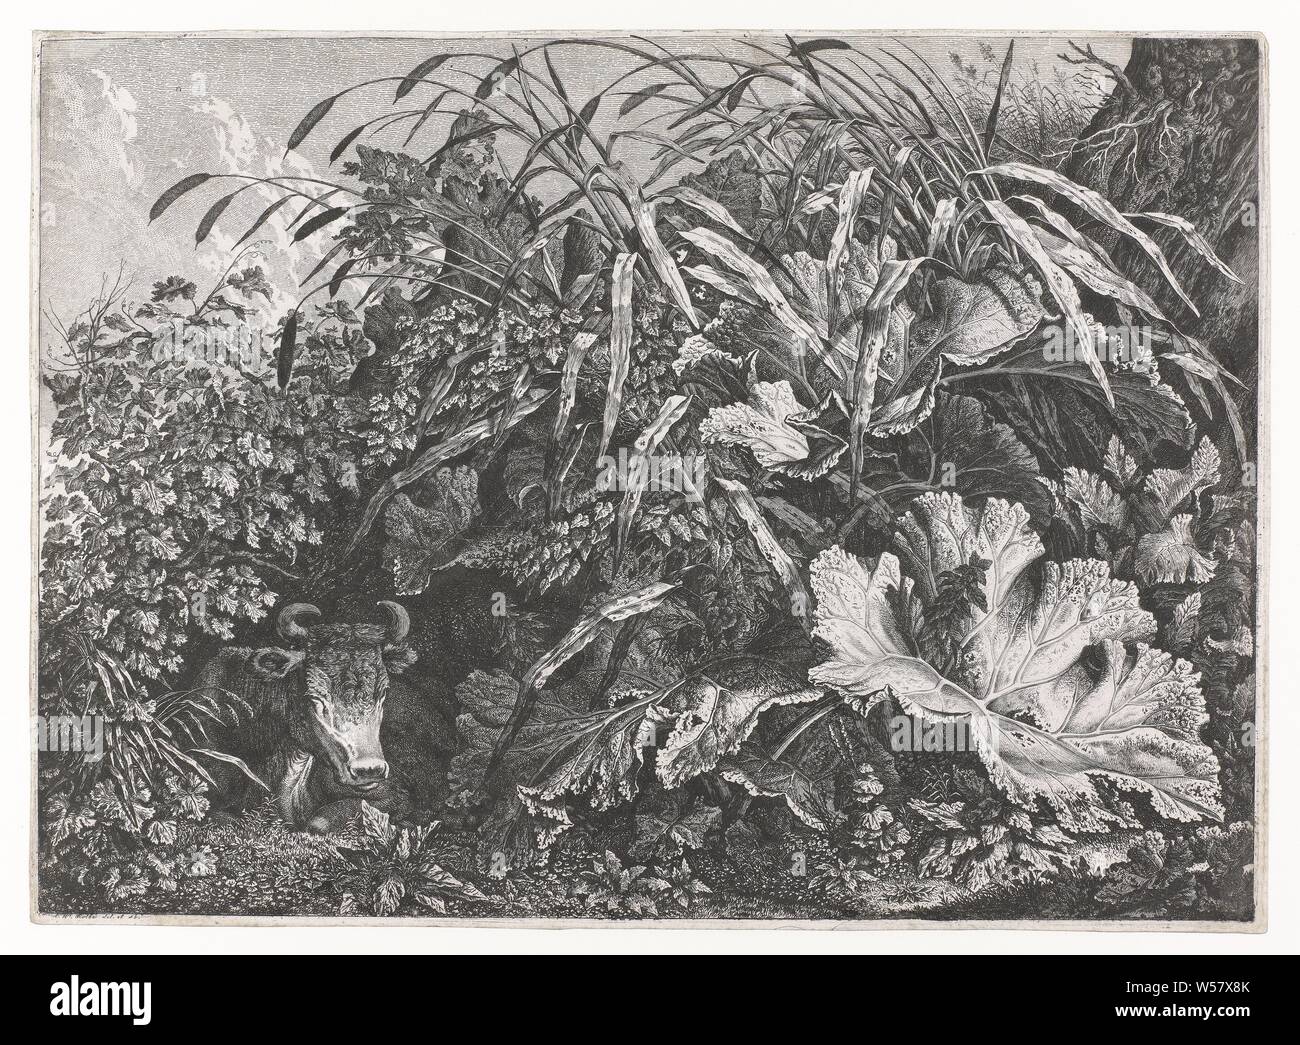 Plants and lying cattle, Possibly a study of the plants, including the large burdock, known under the Latin name 'Arctium lappa', cow, lower plants, Carl Wilhelm Kolbe (I) (mentioned on object), 1767 - 1835, paper, etching, h 306 mm × w 416 mm Stock Photo